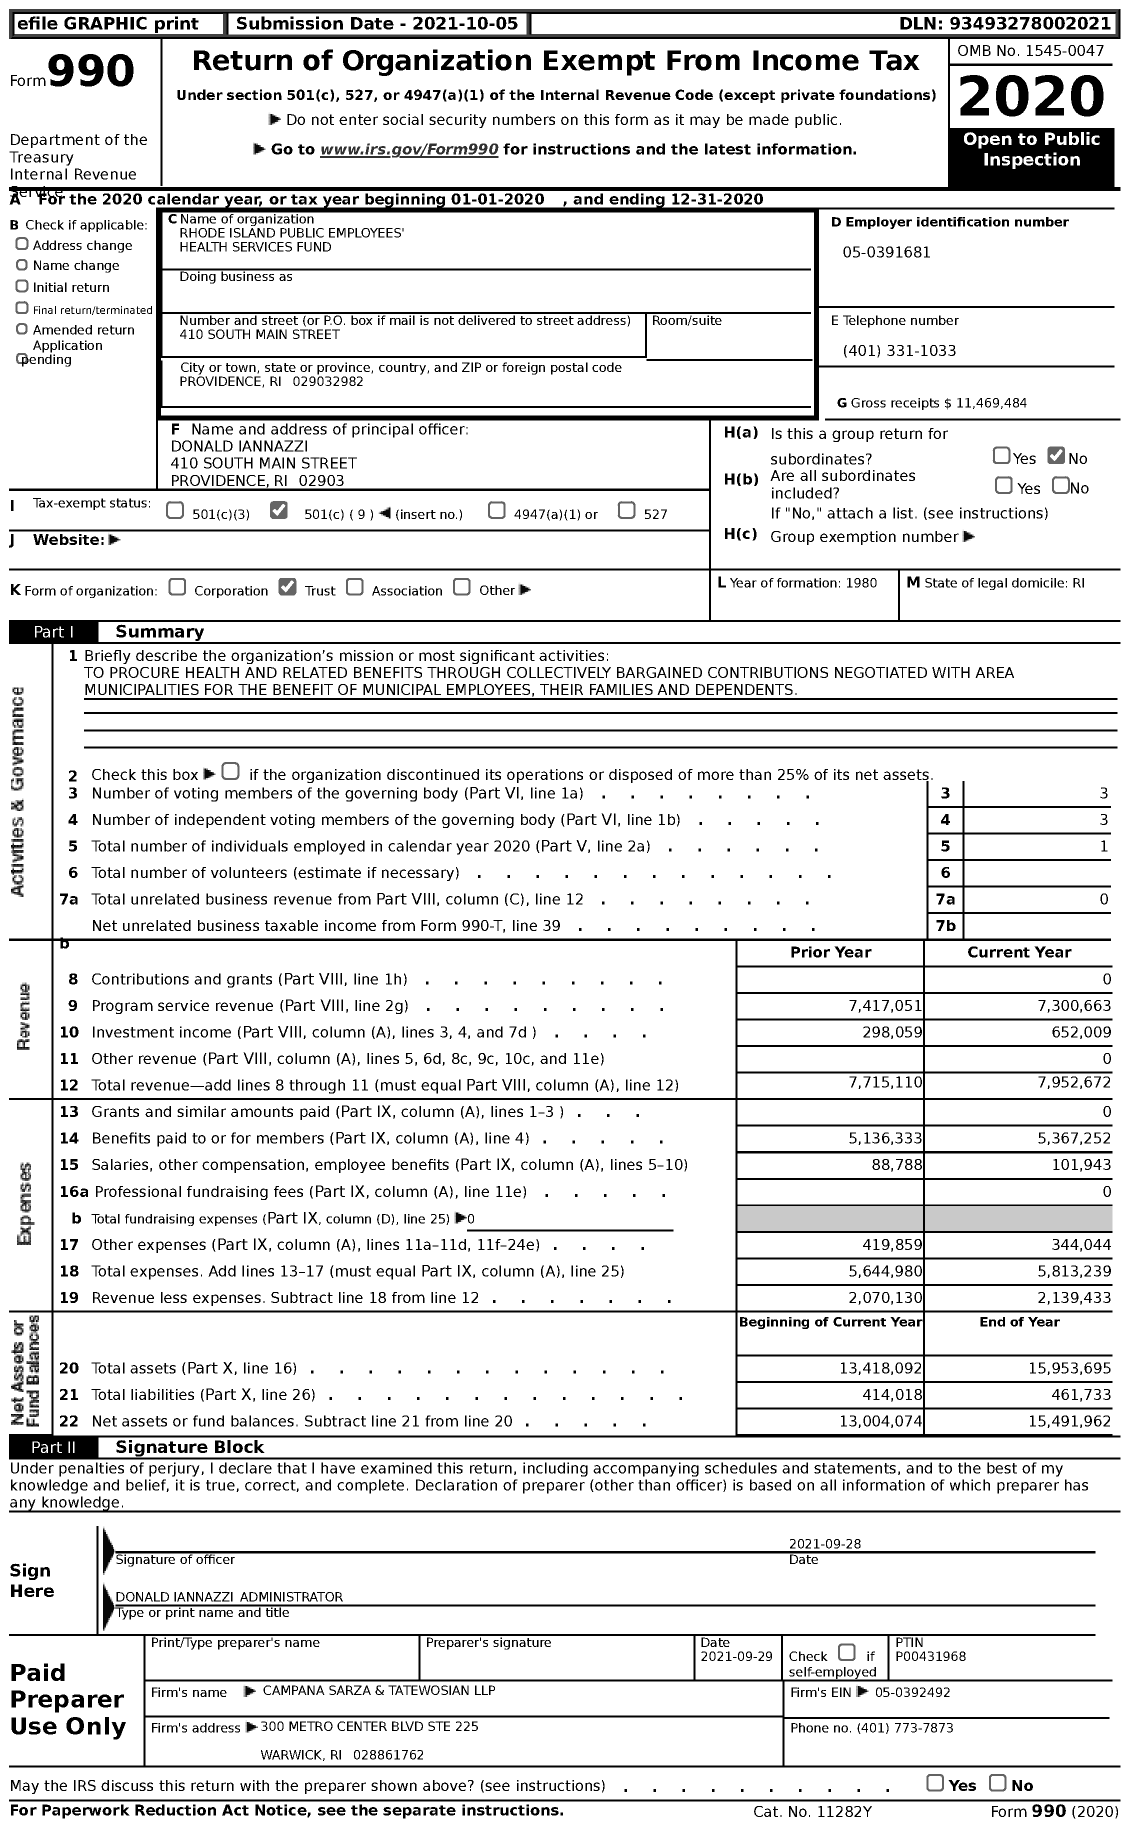 Image of first page of 2020 Form 990 for Rhode Island Public Employees' Health Services Fund